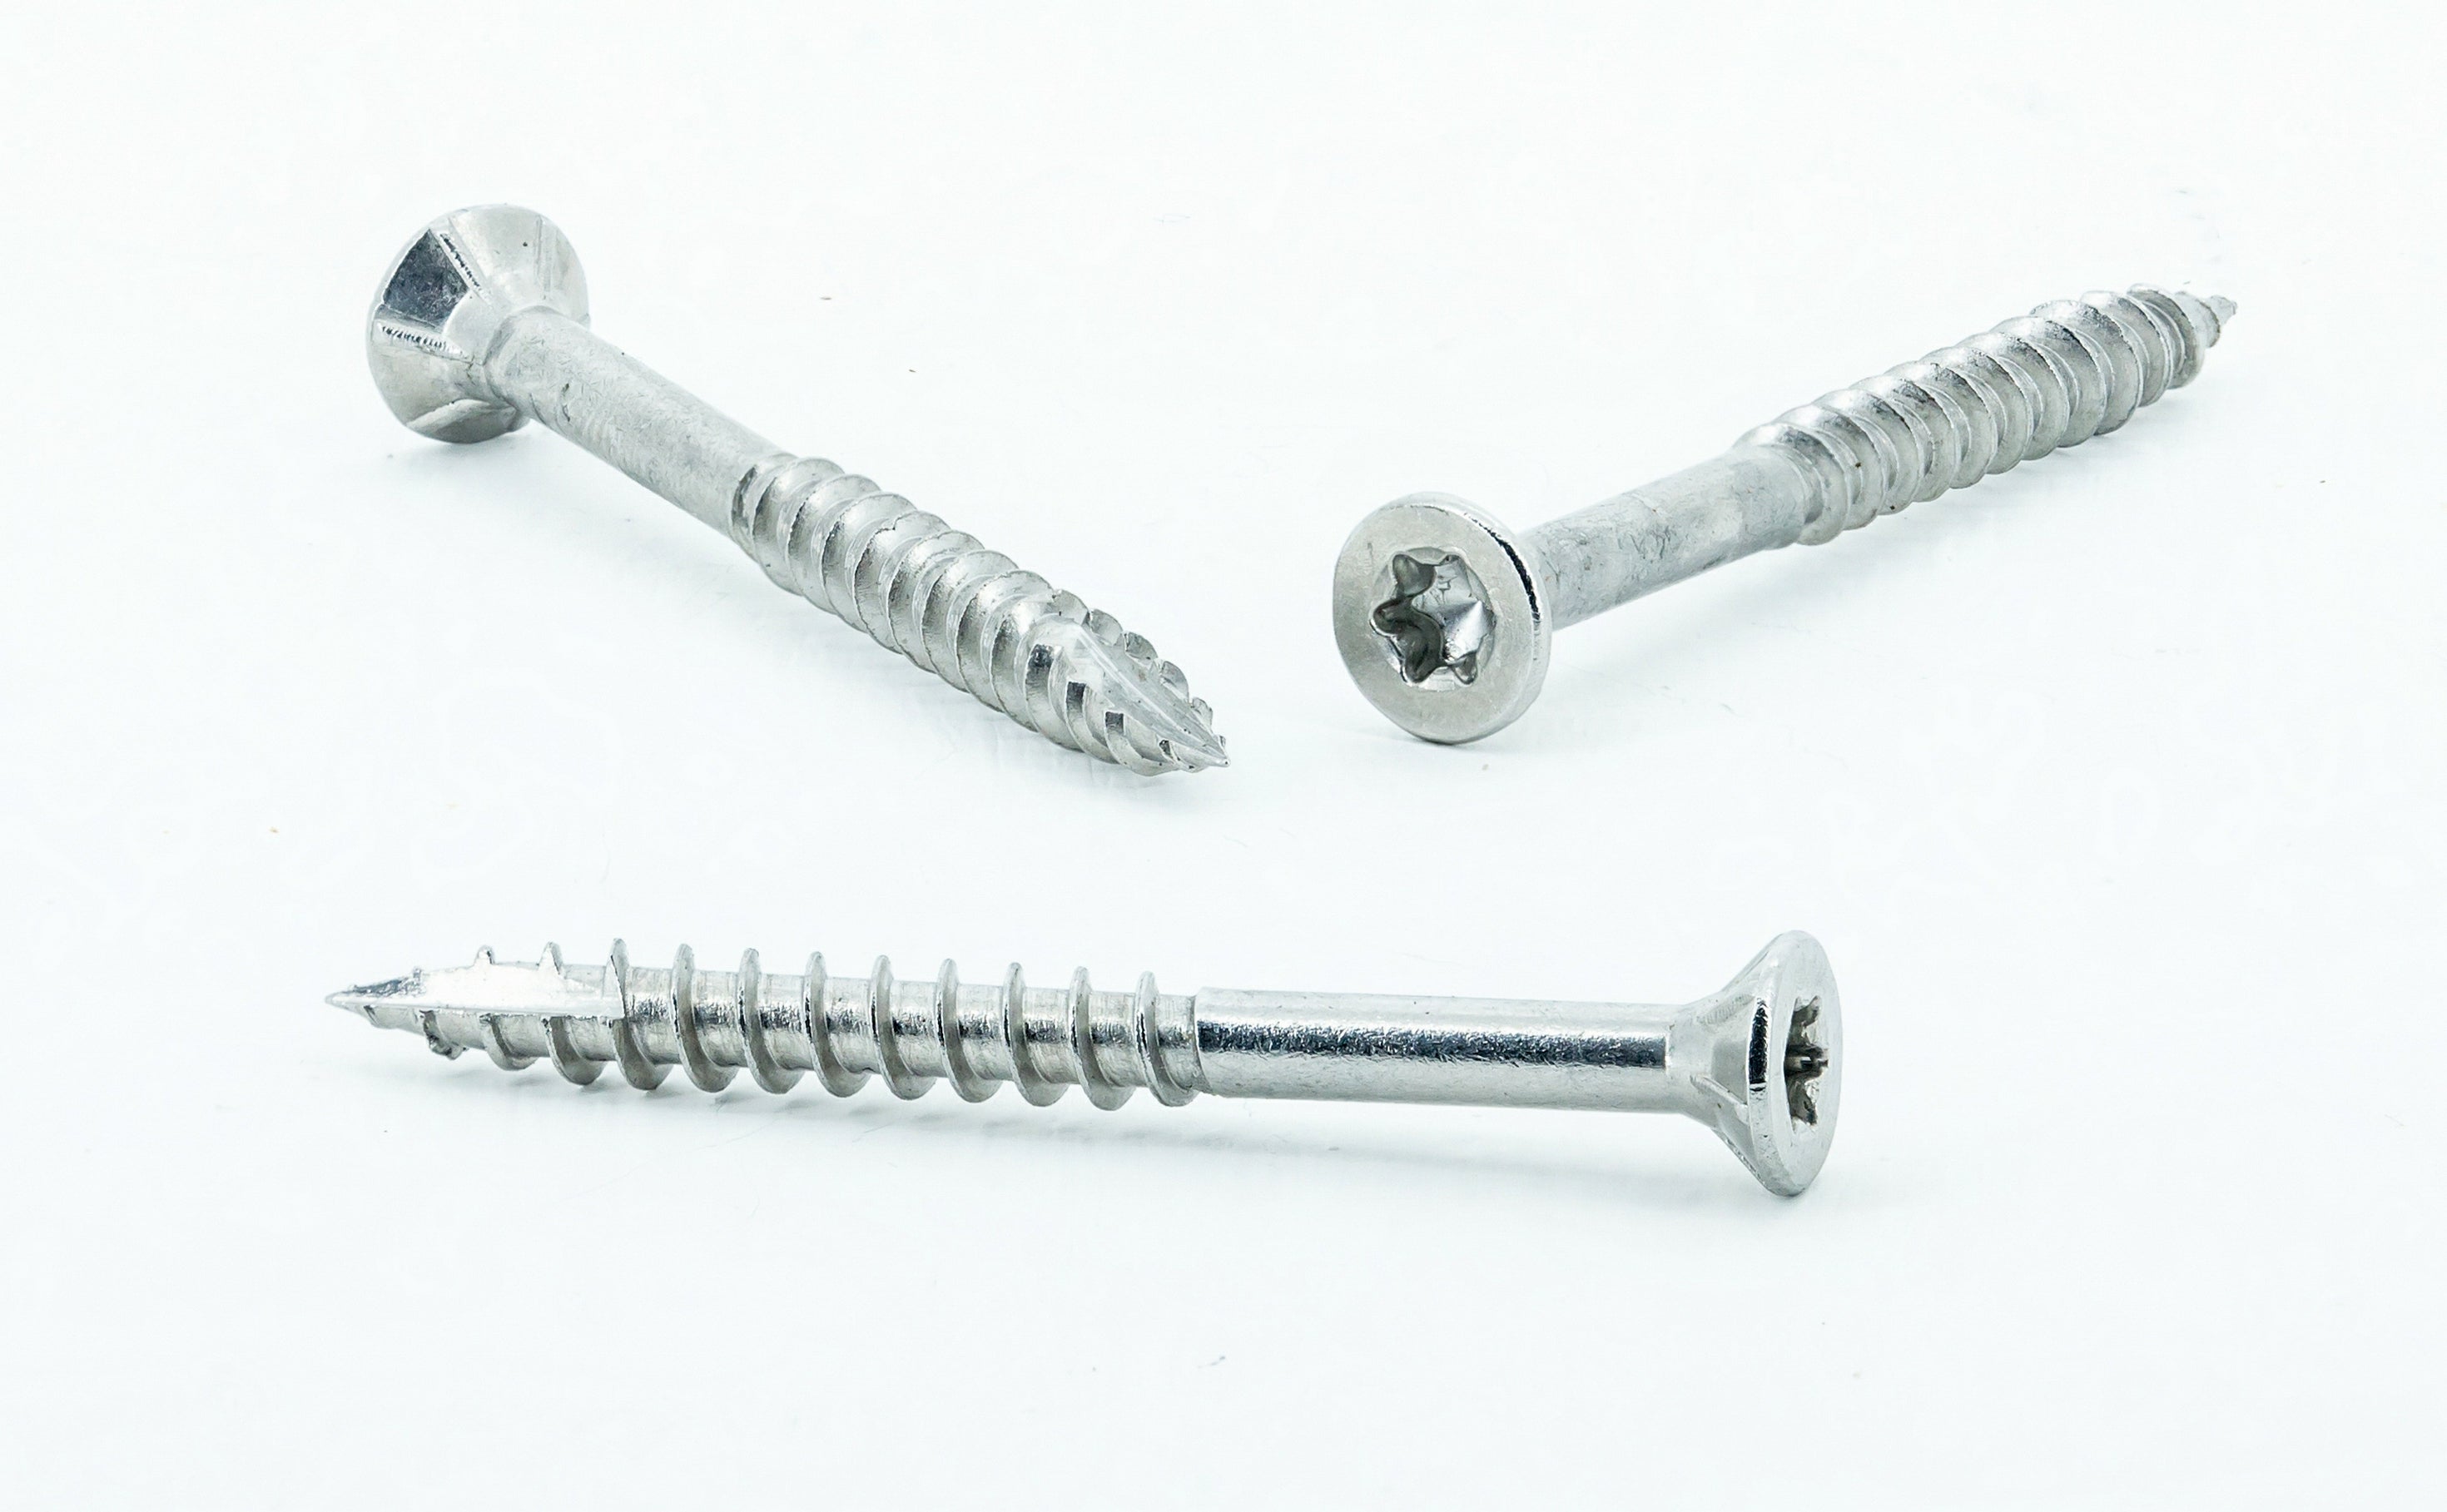 #10 × 2 Inch Stainless Steel Wood Screws 304 Grade Torx Star Drive by Allen's Trading Co. Eagle Claw Fasteners